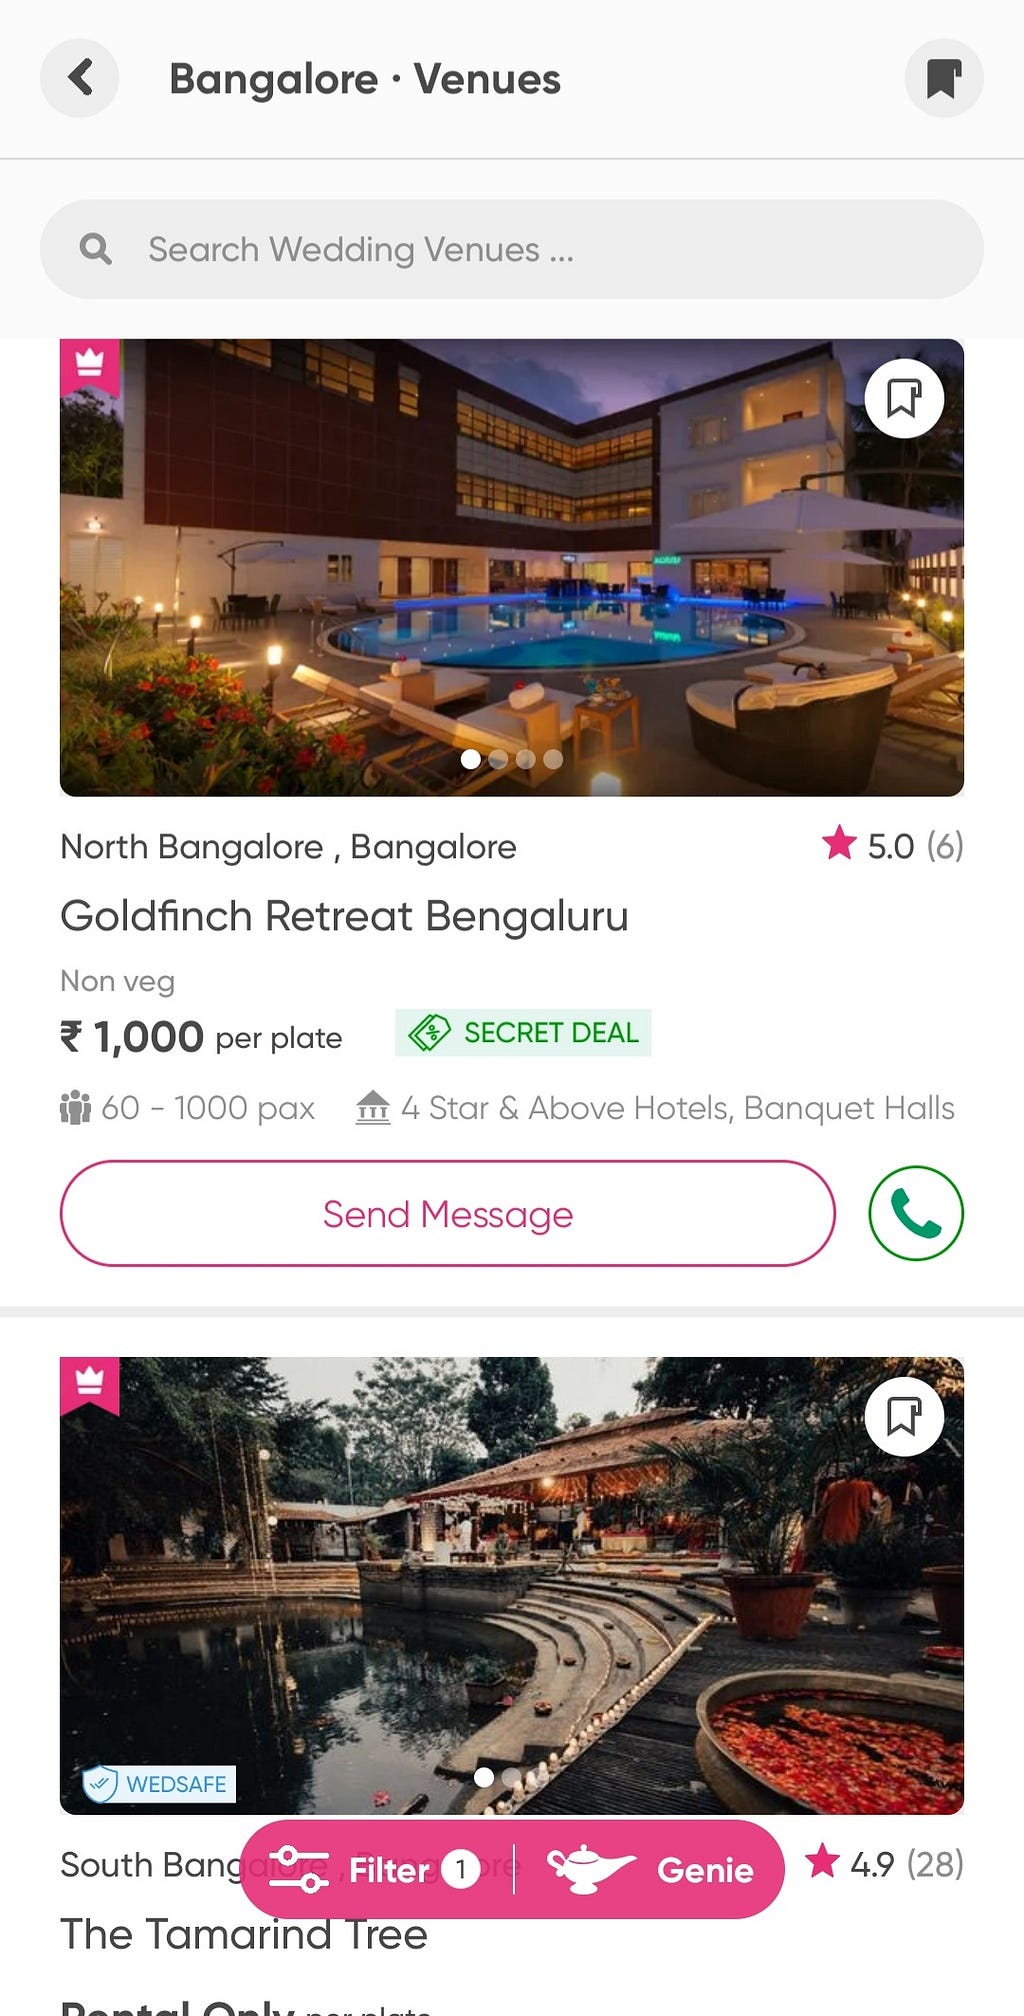 Page for browsing vendor hotels